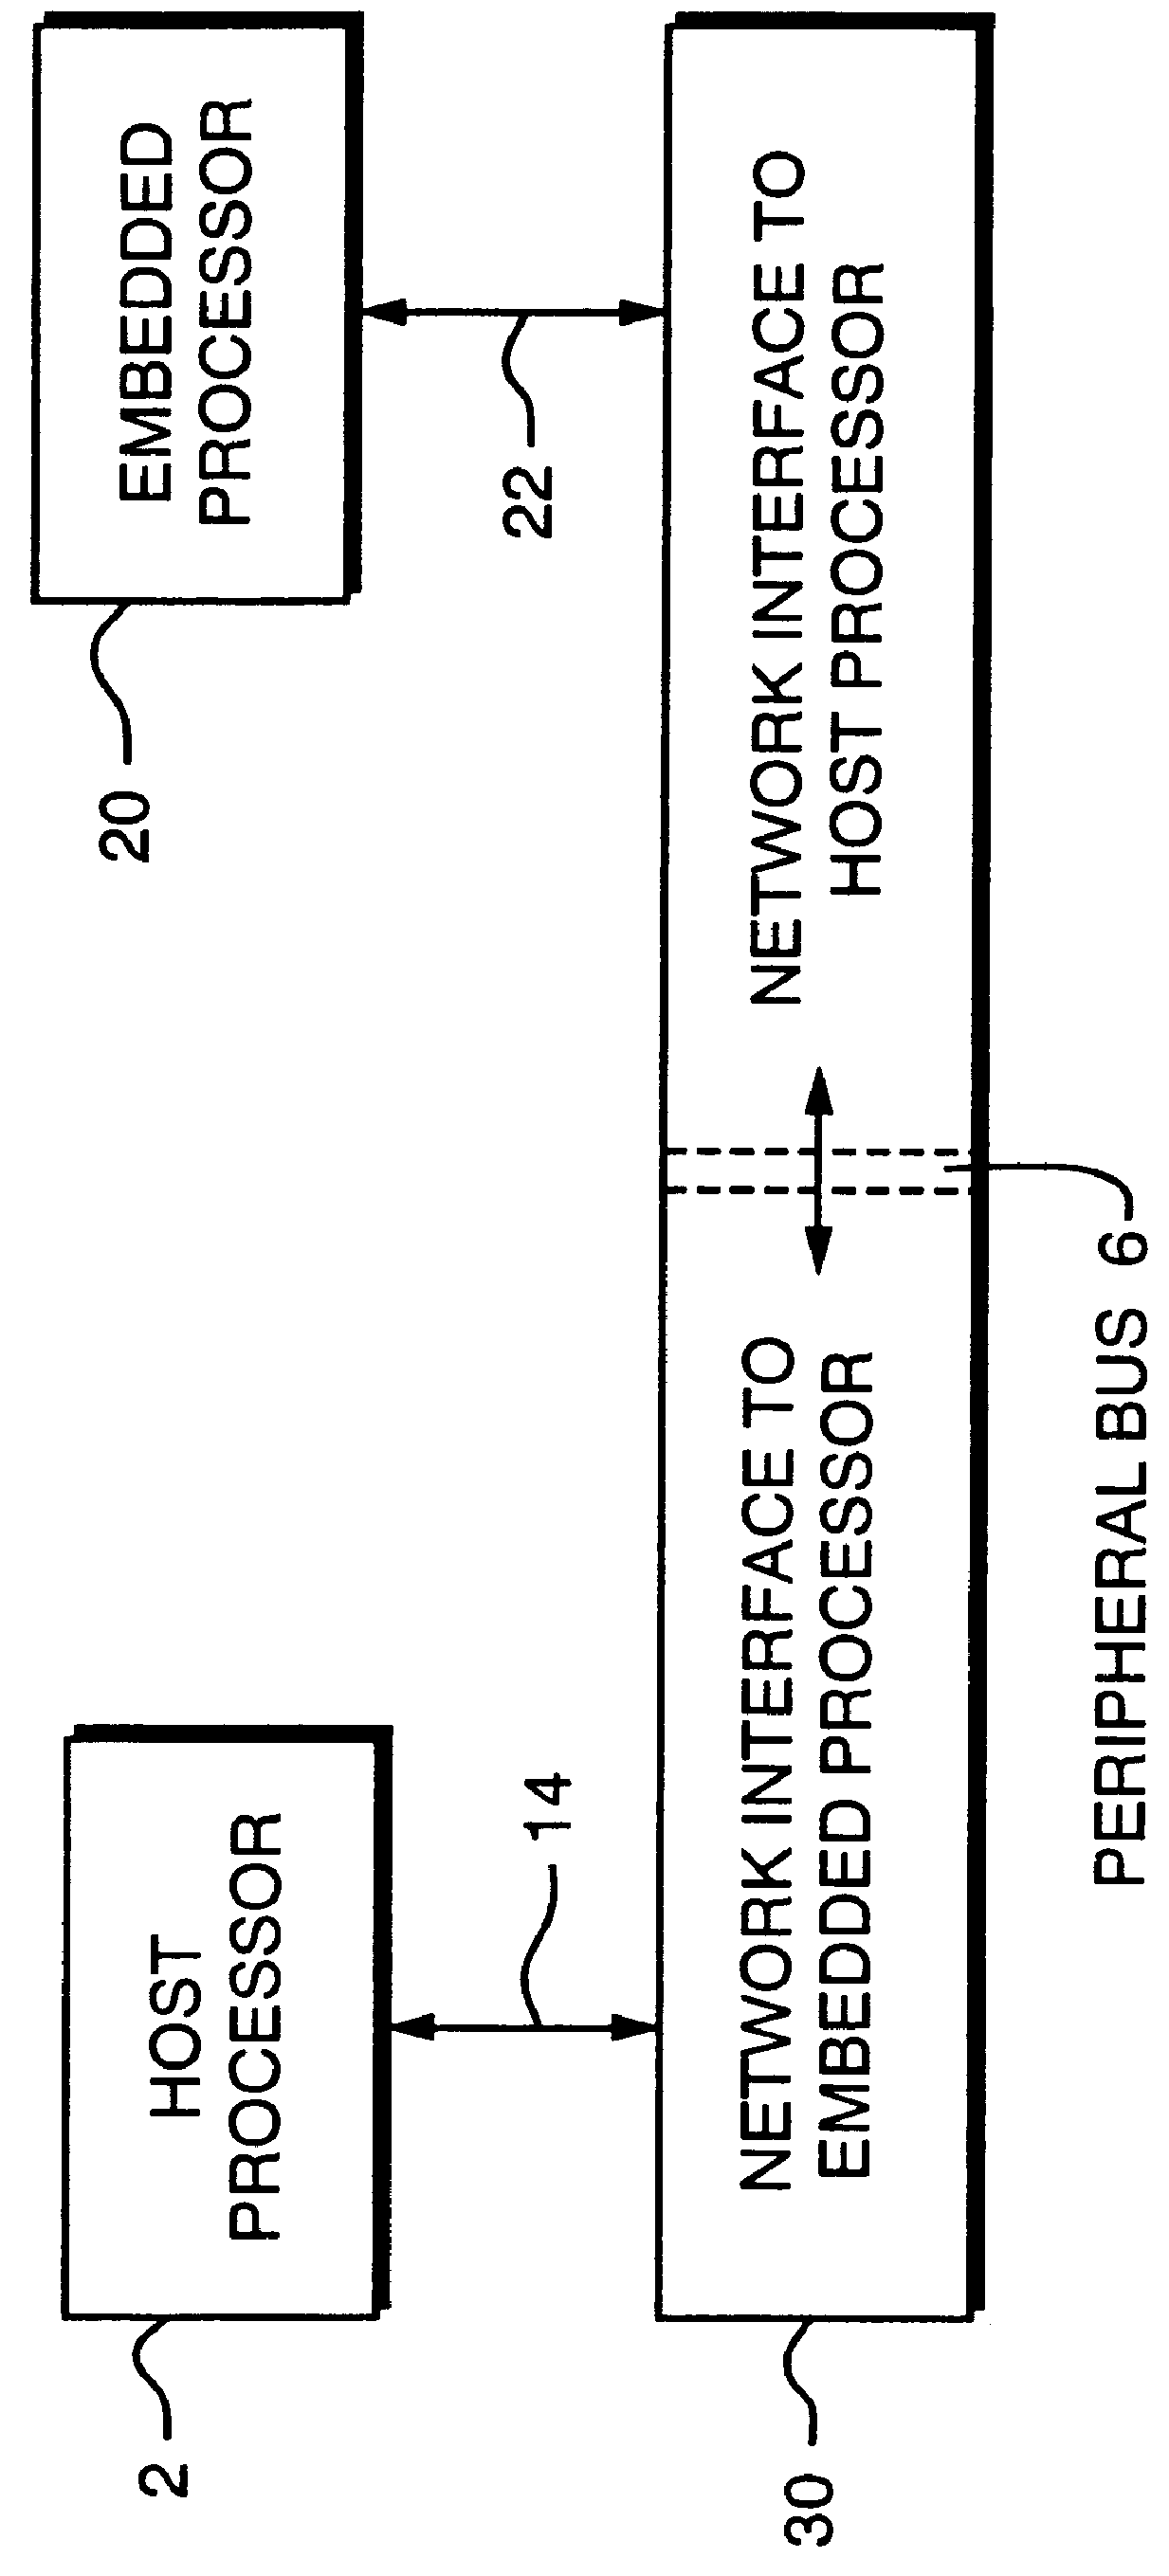 Apparent network interface for and between embedded and host processors